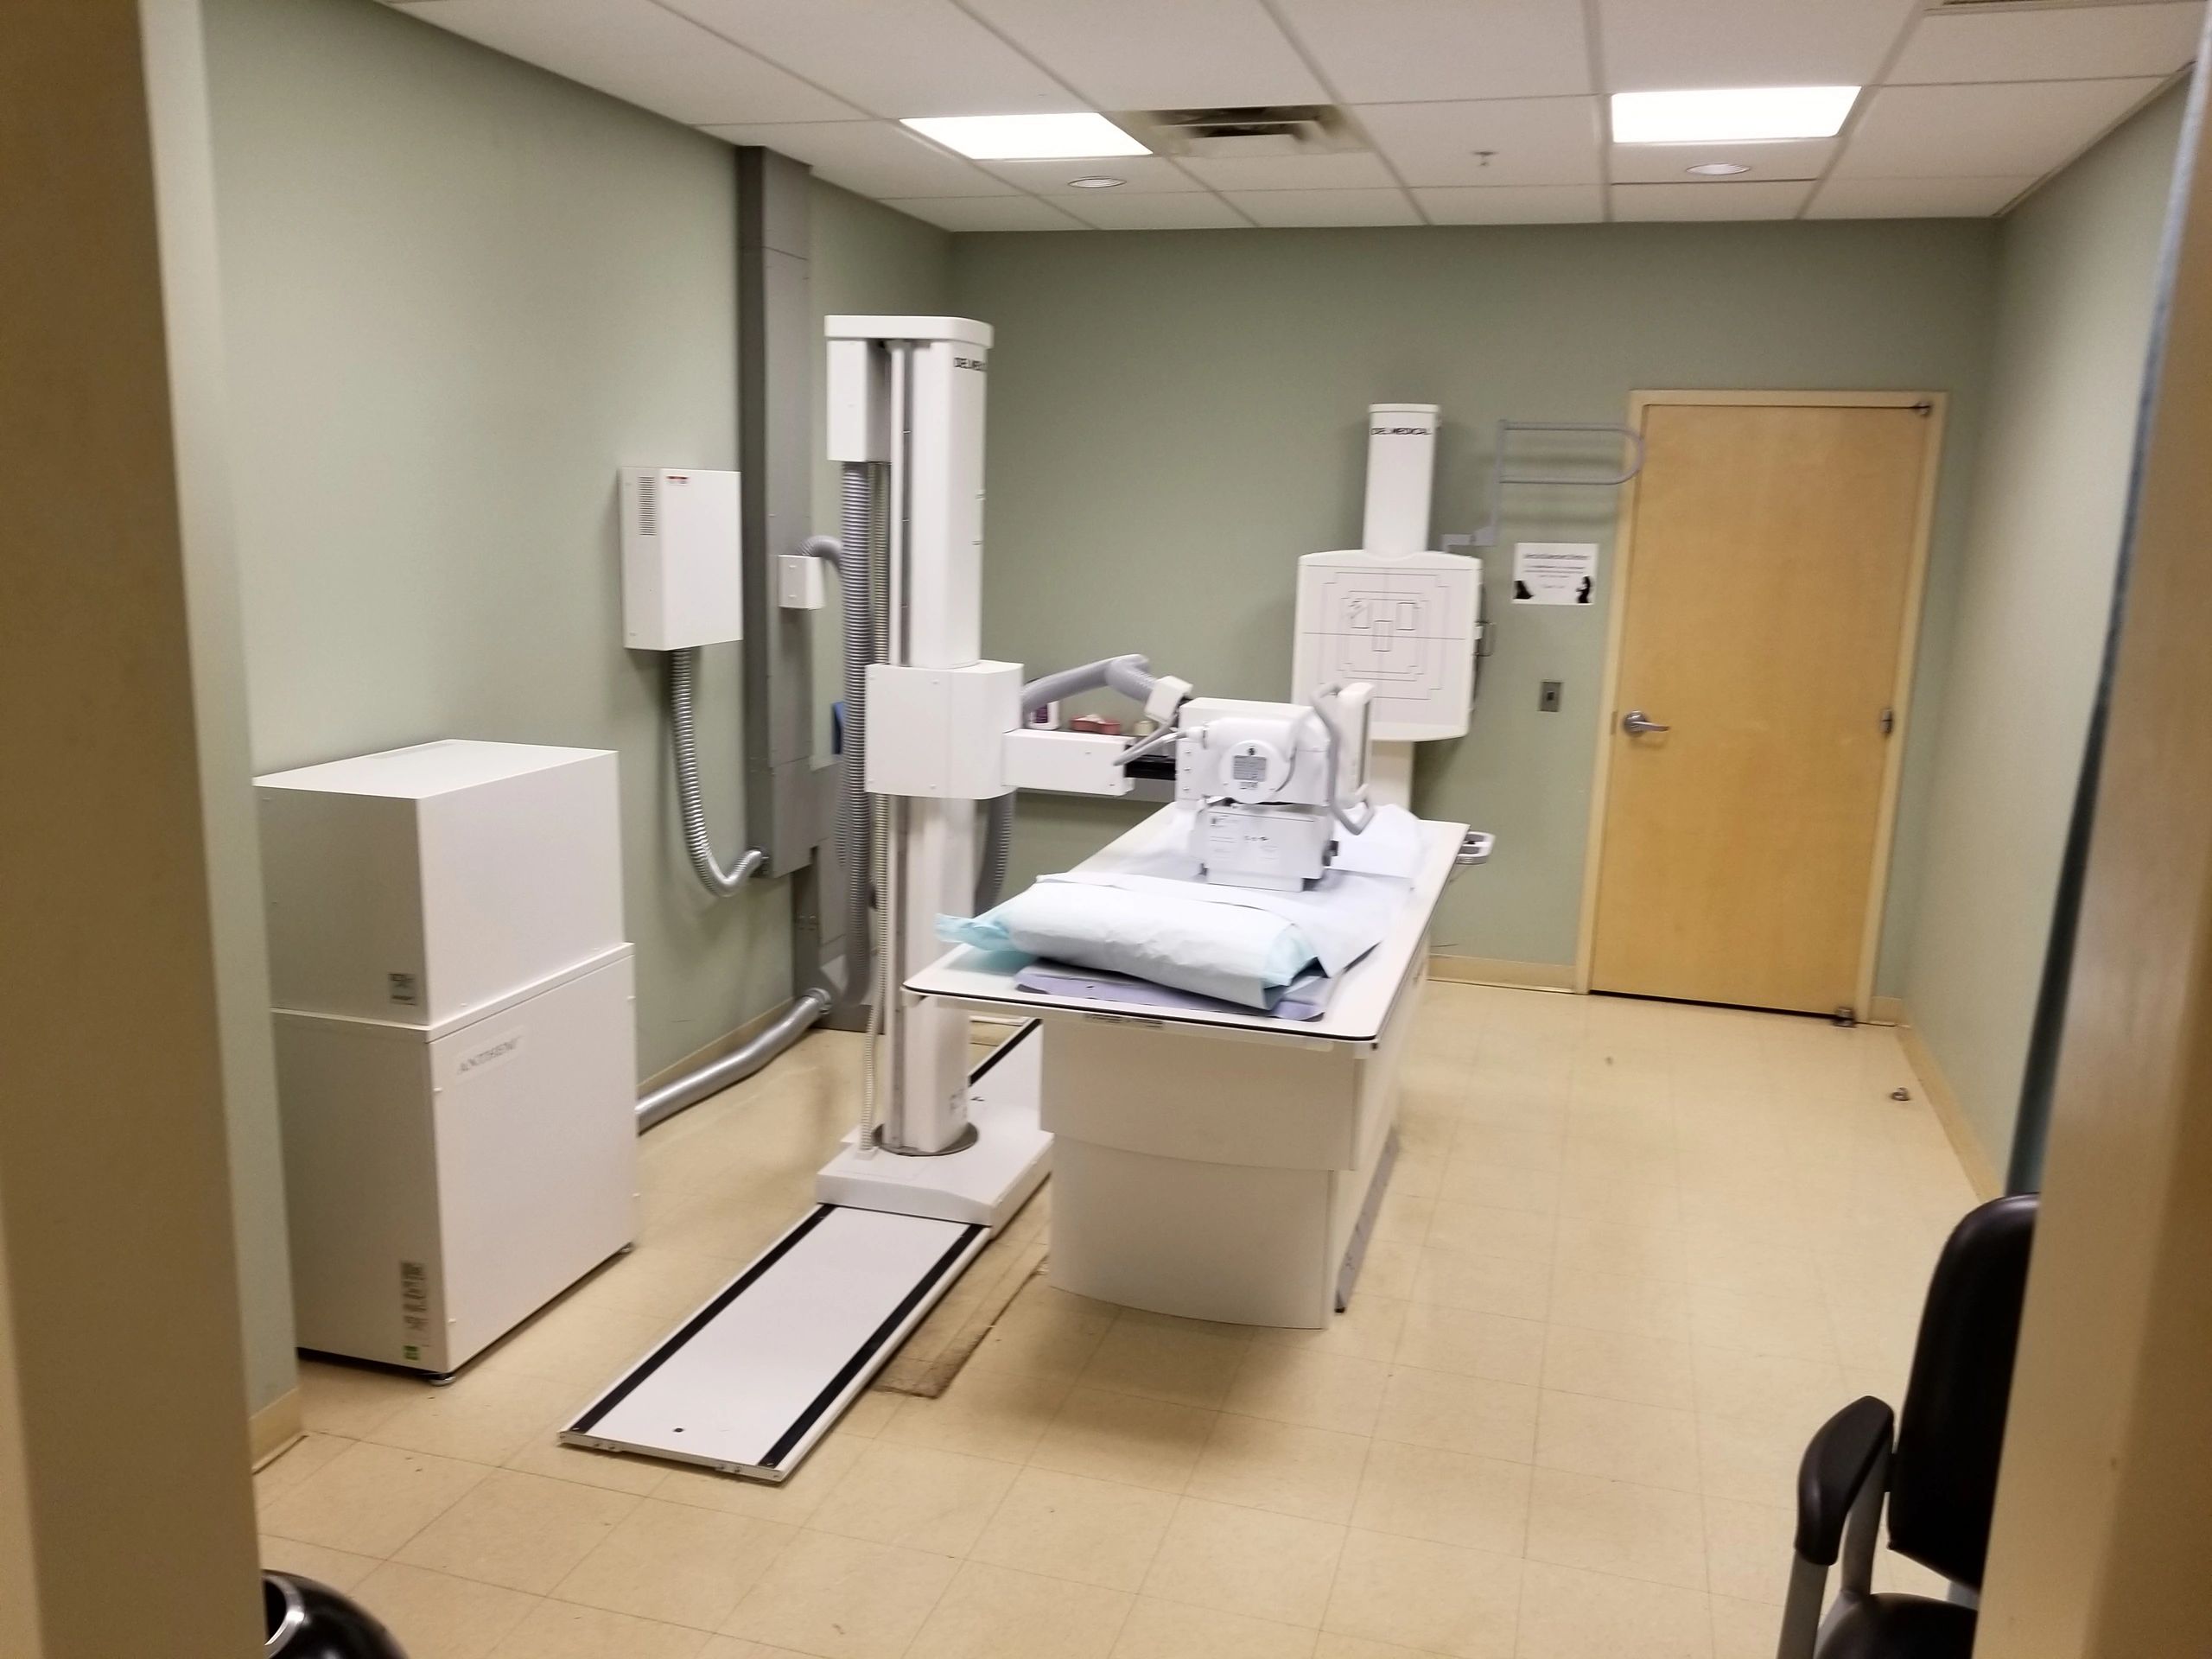 X-Ray room installed by Omni Imaging with assistance from Woodgrove Services.